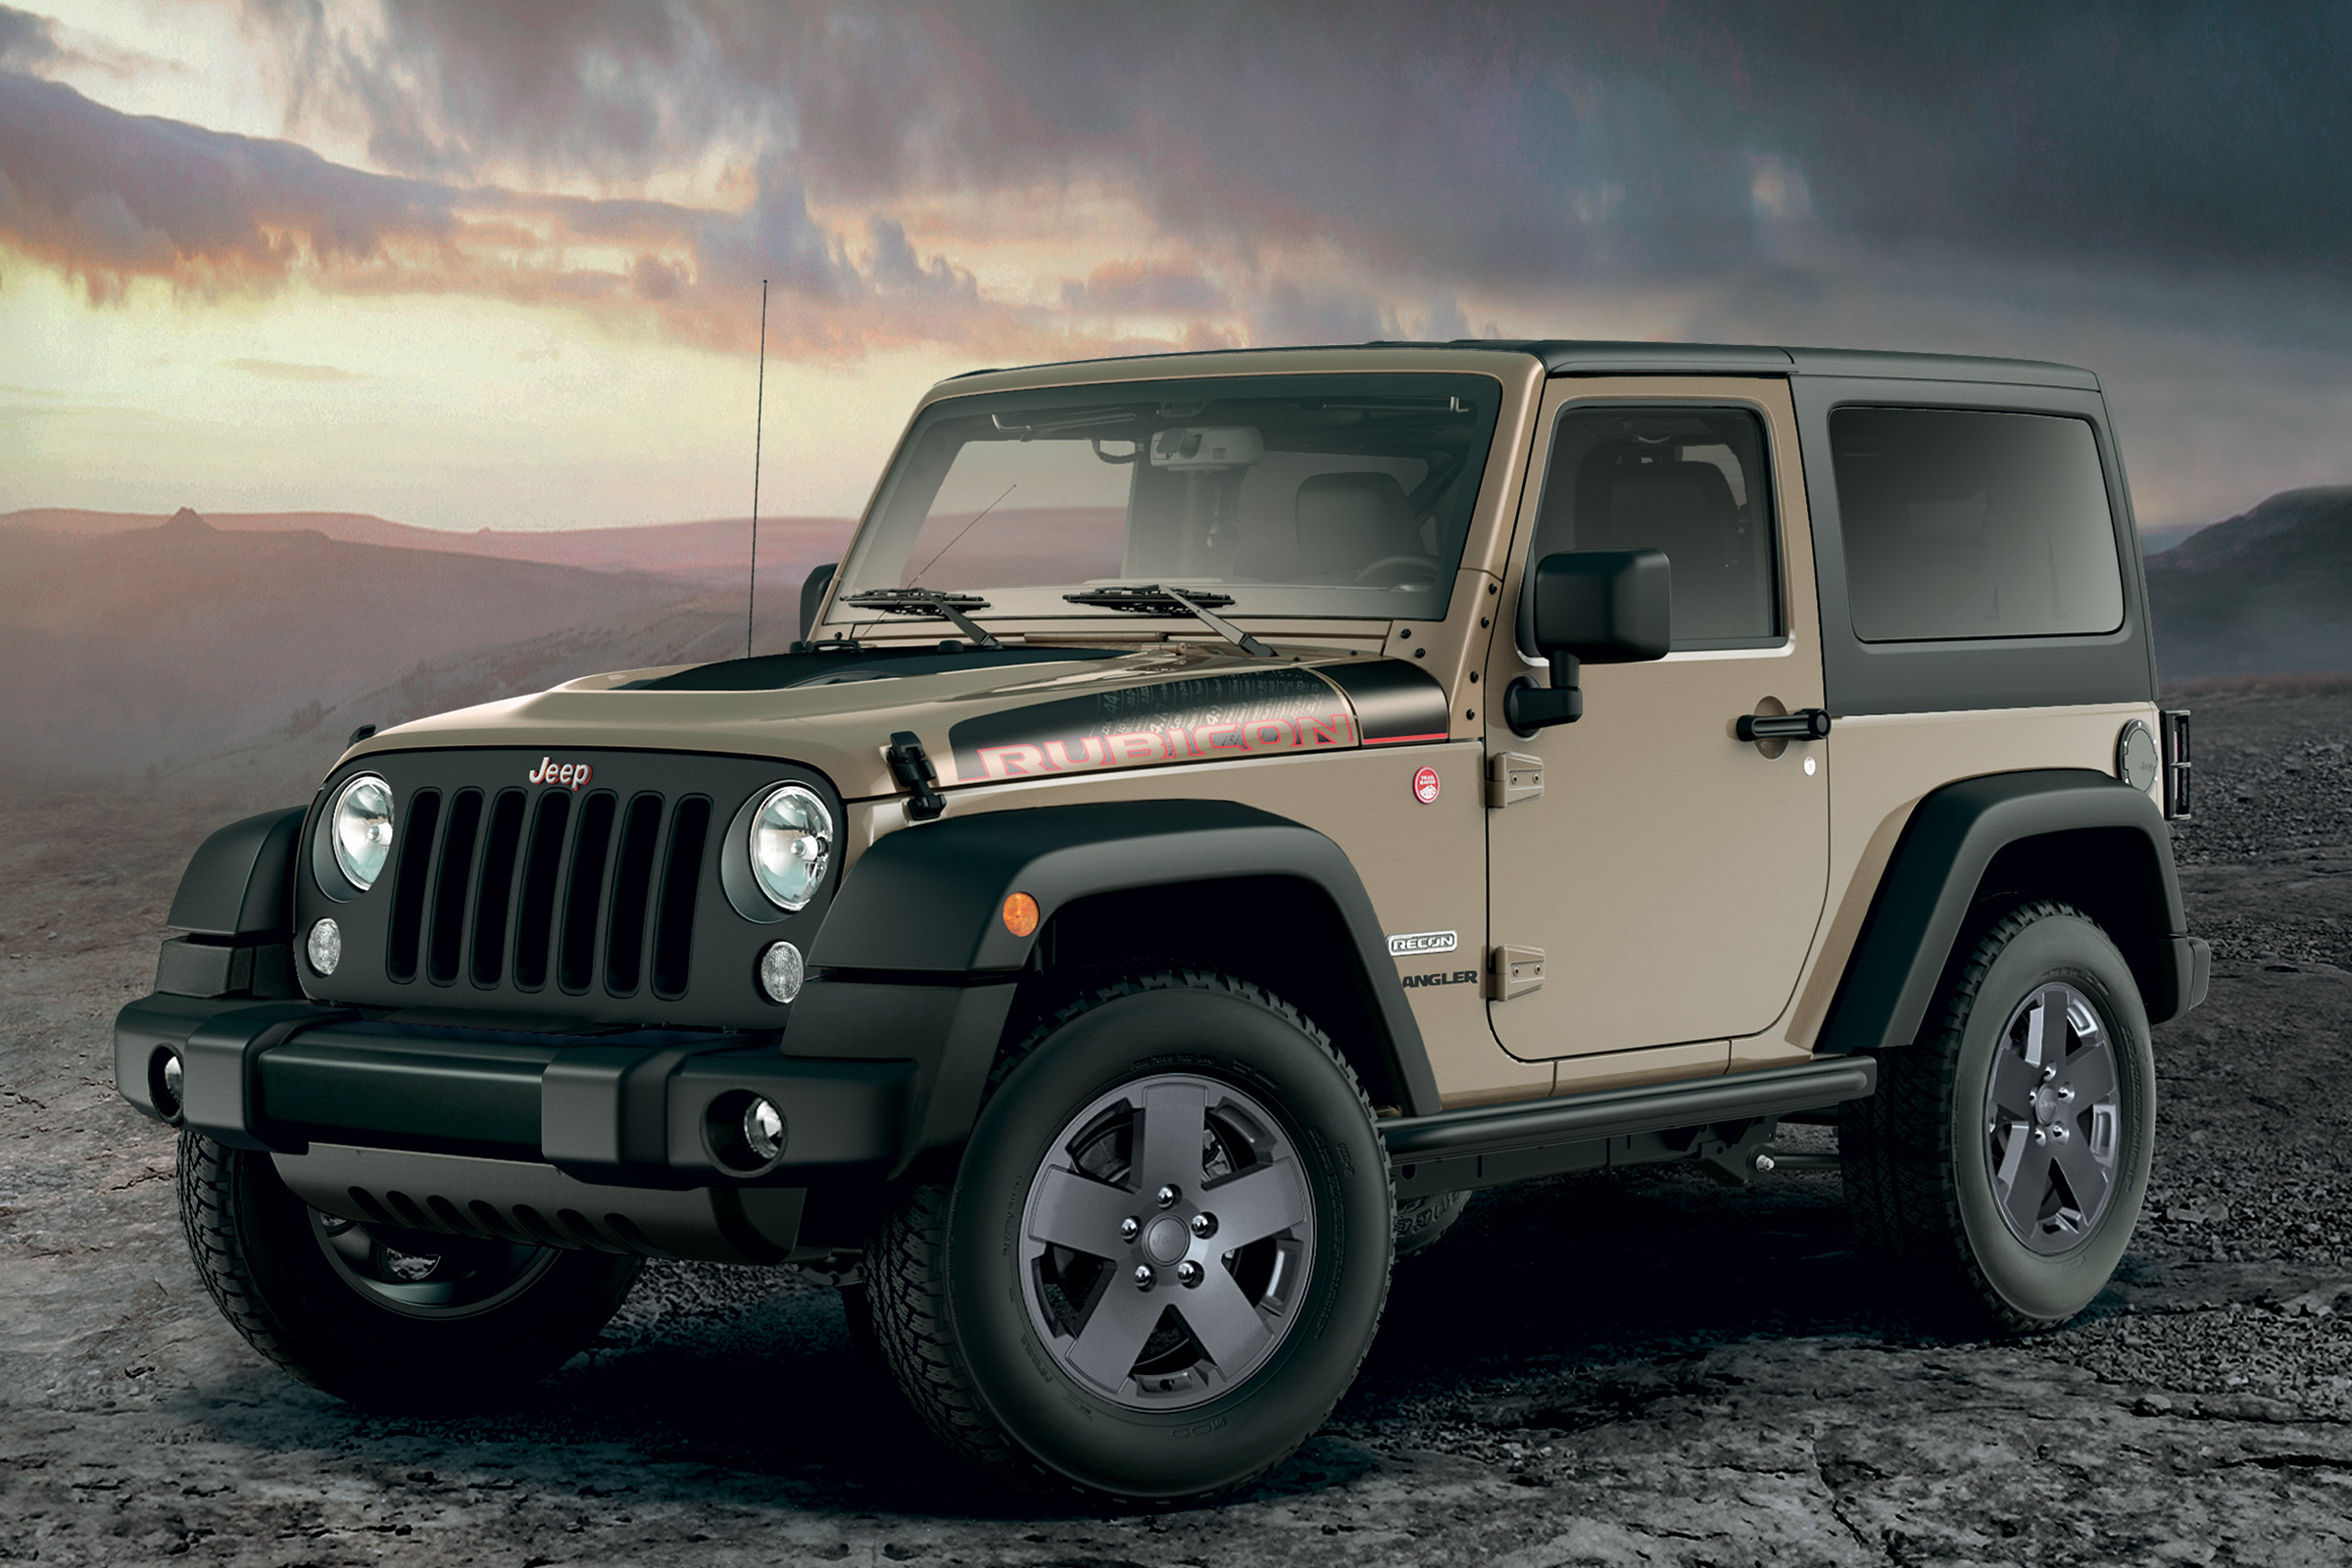 Jeep Wrangler Rubicon Recon special edition arrives in UK